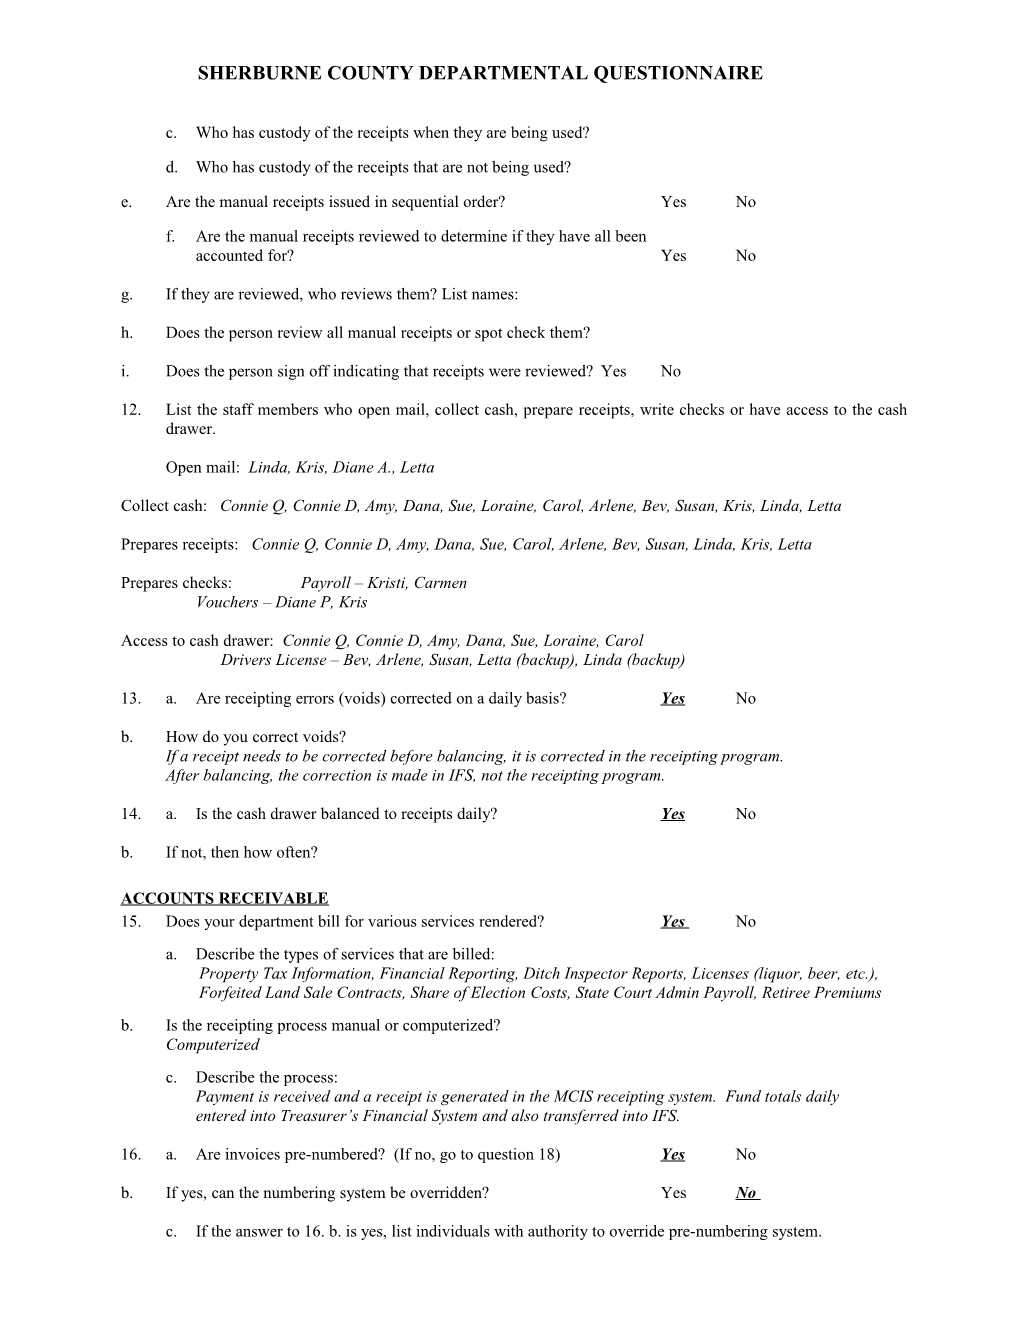 Sherburne County Departmental Questionnaire s1